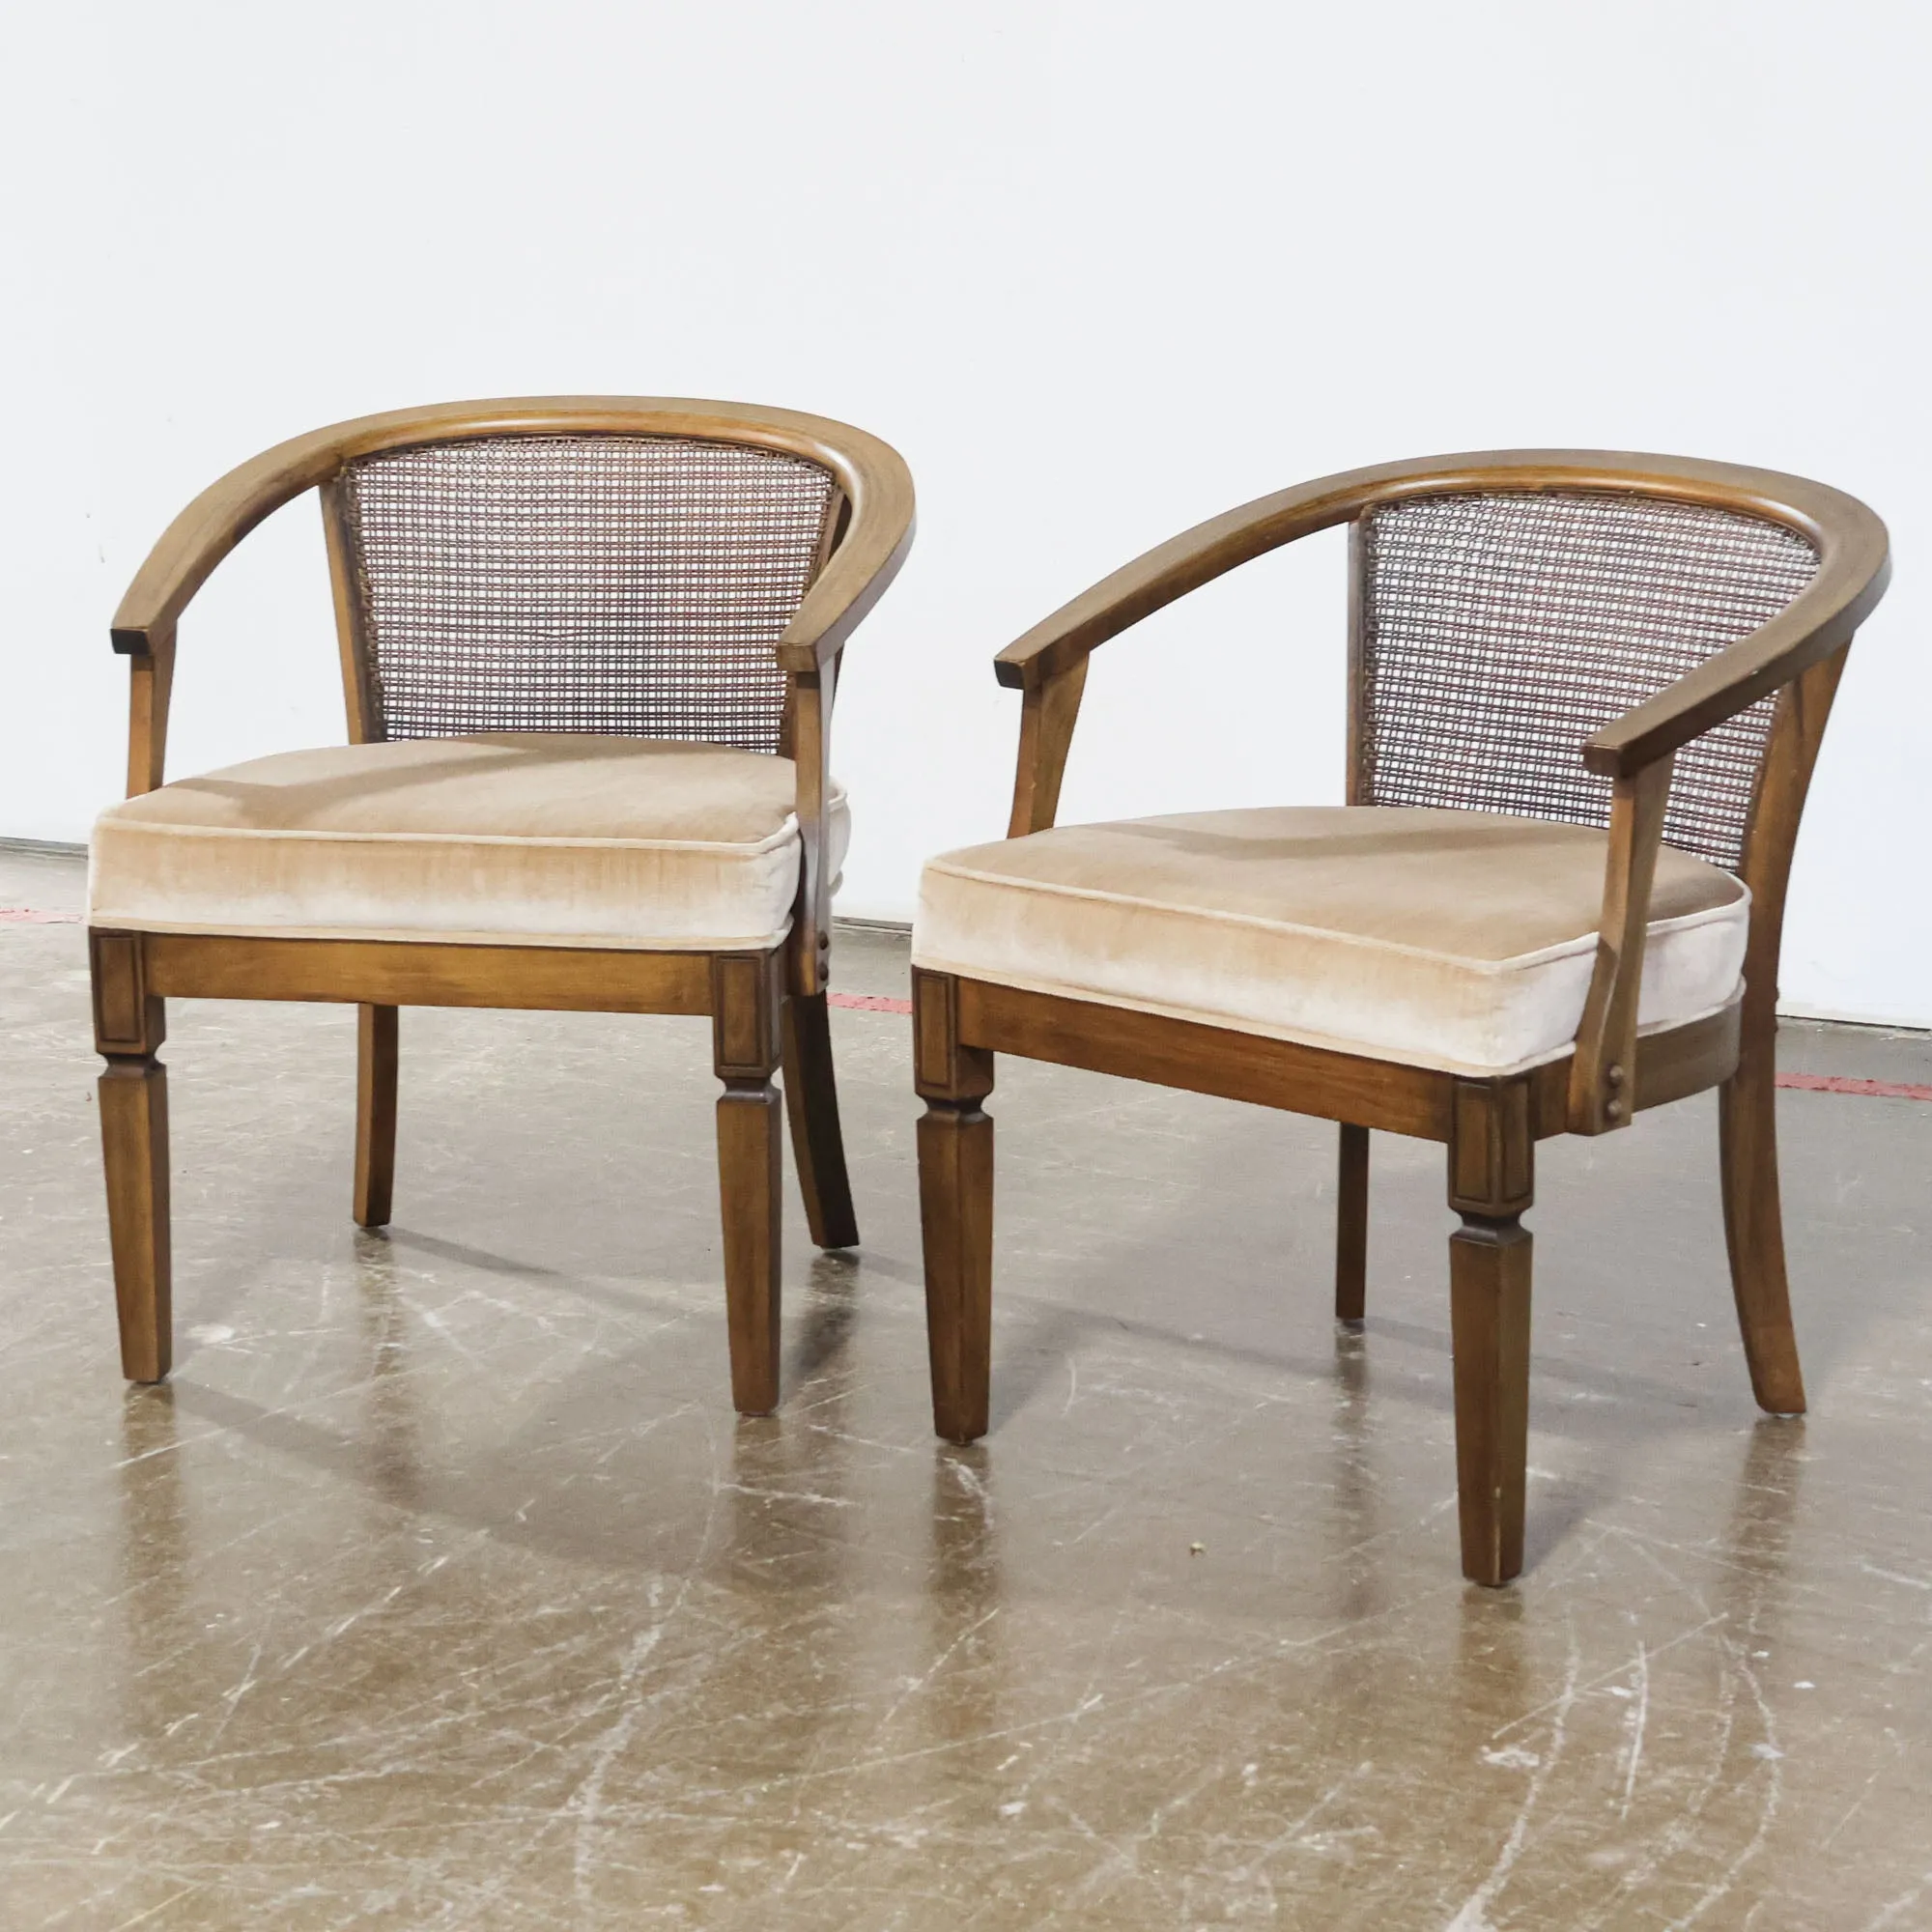 Pair of Barrel Back Chairs